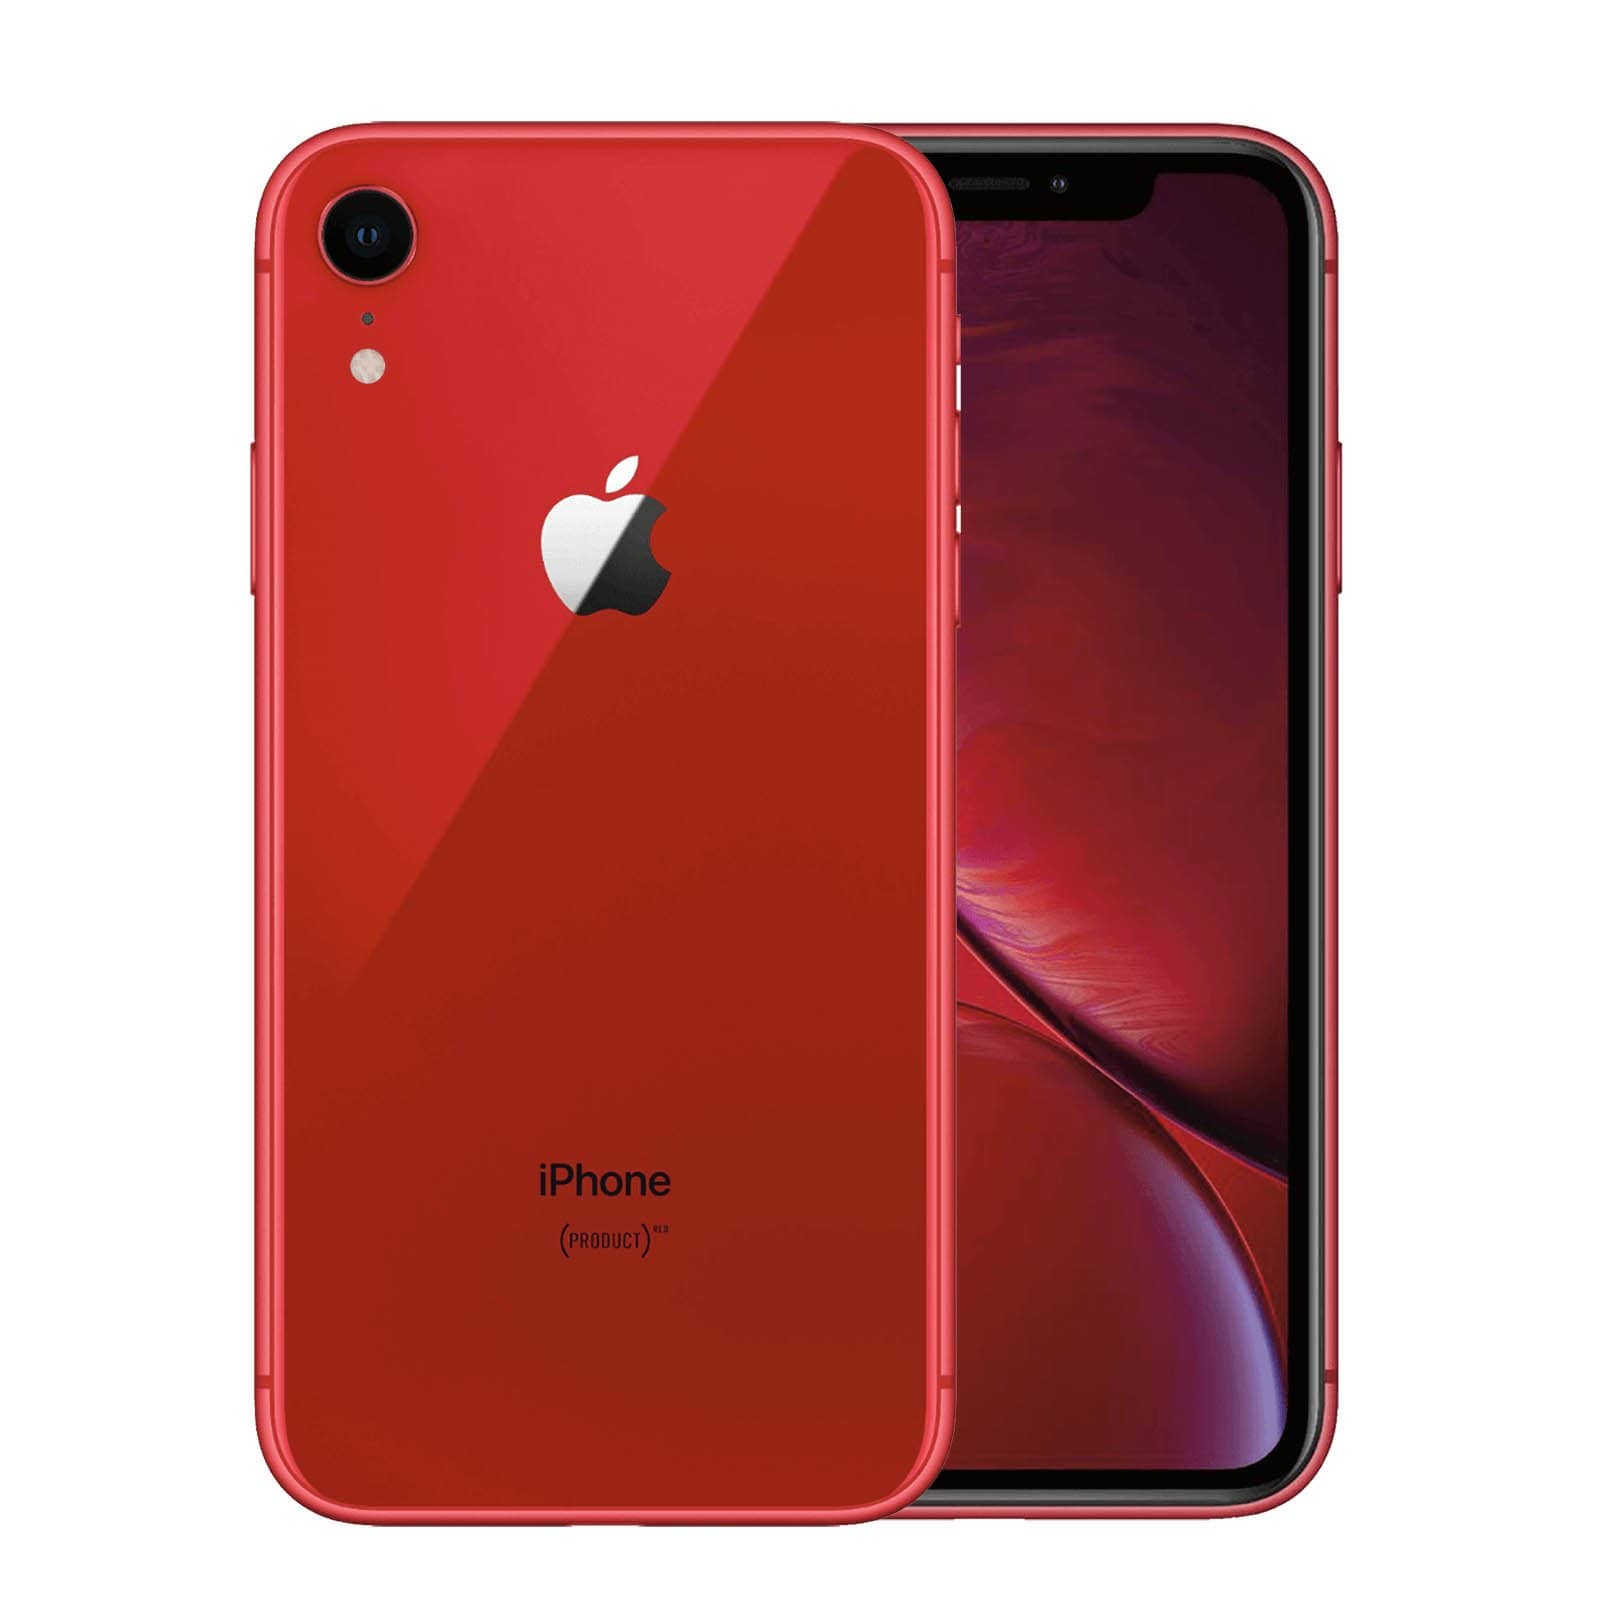 Apple iPhone XR 256GB Product Red Very Good - Unlocked 256GB Product Red Very Good